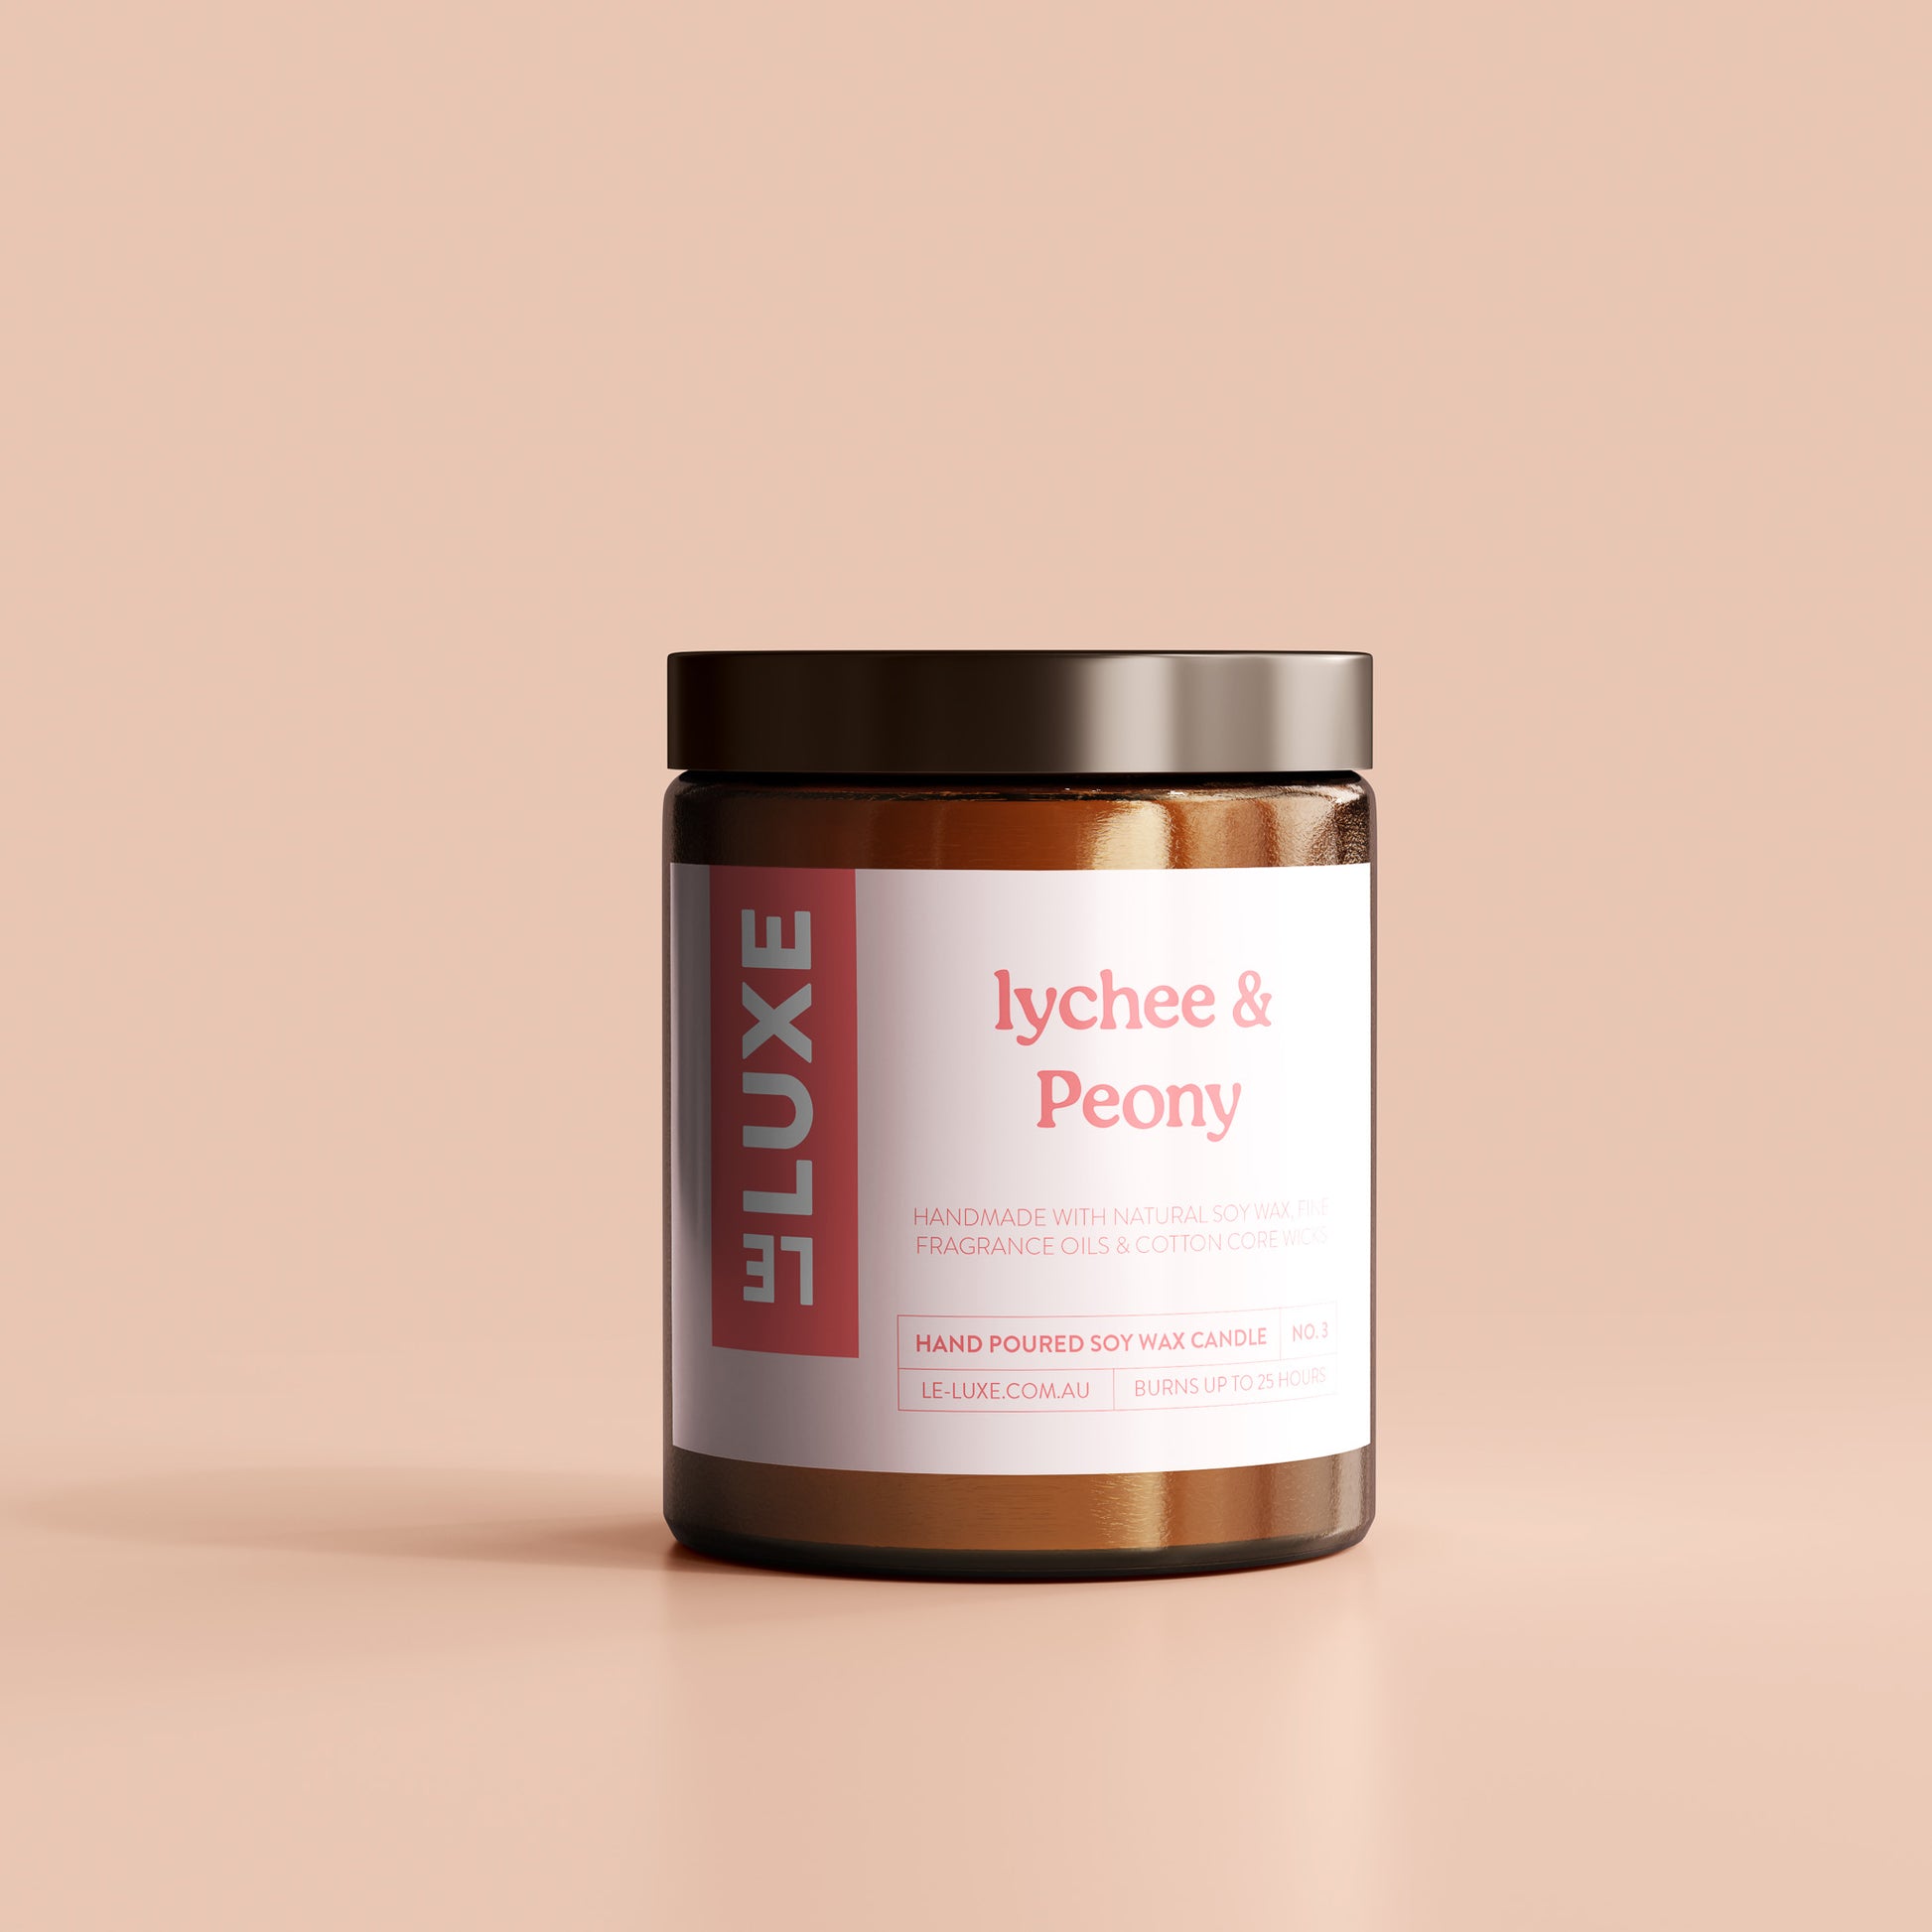 Le Luxe Soy Wax Candle - Lychee & Peony